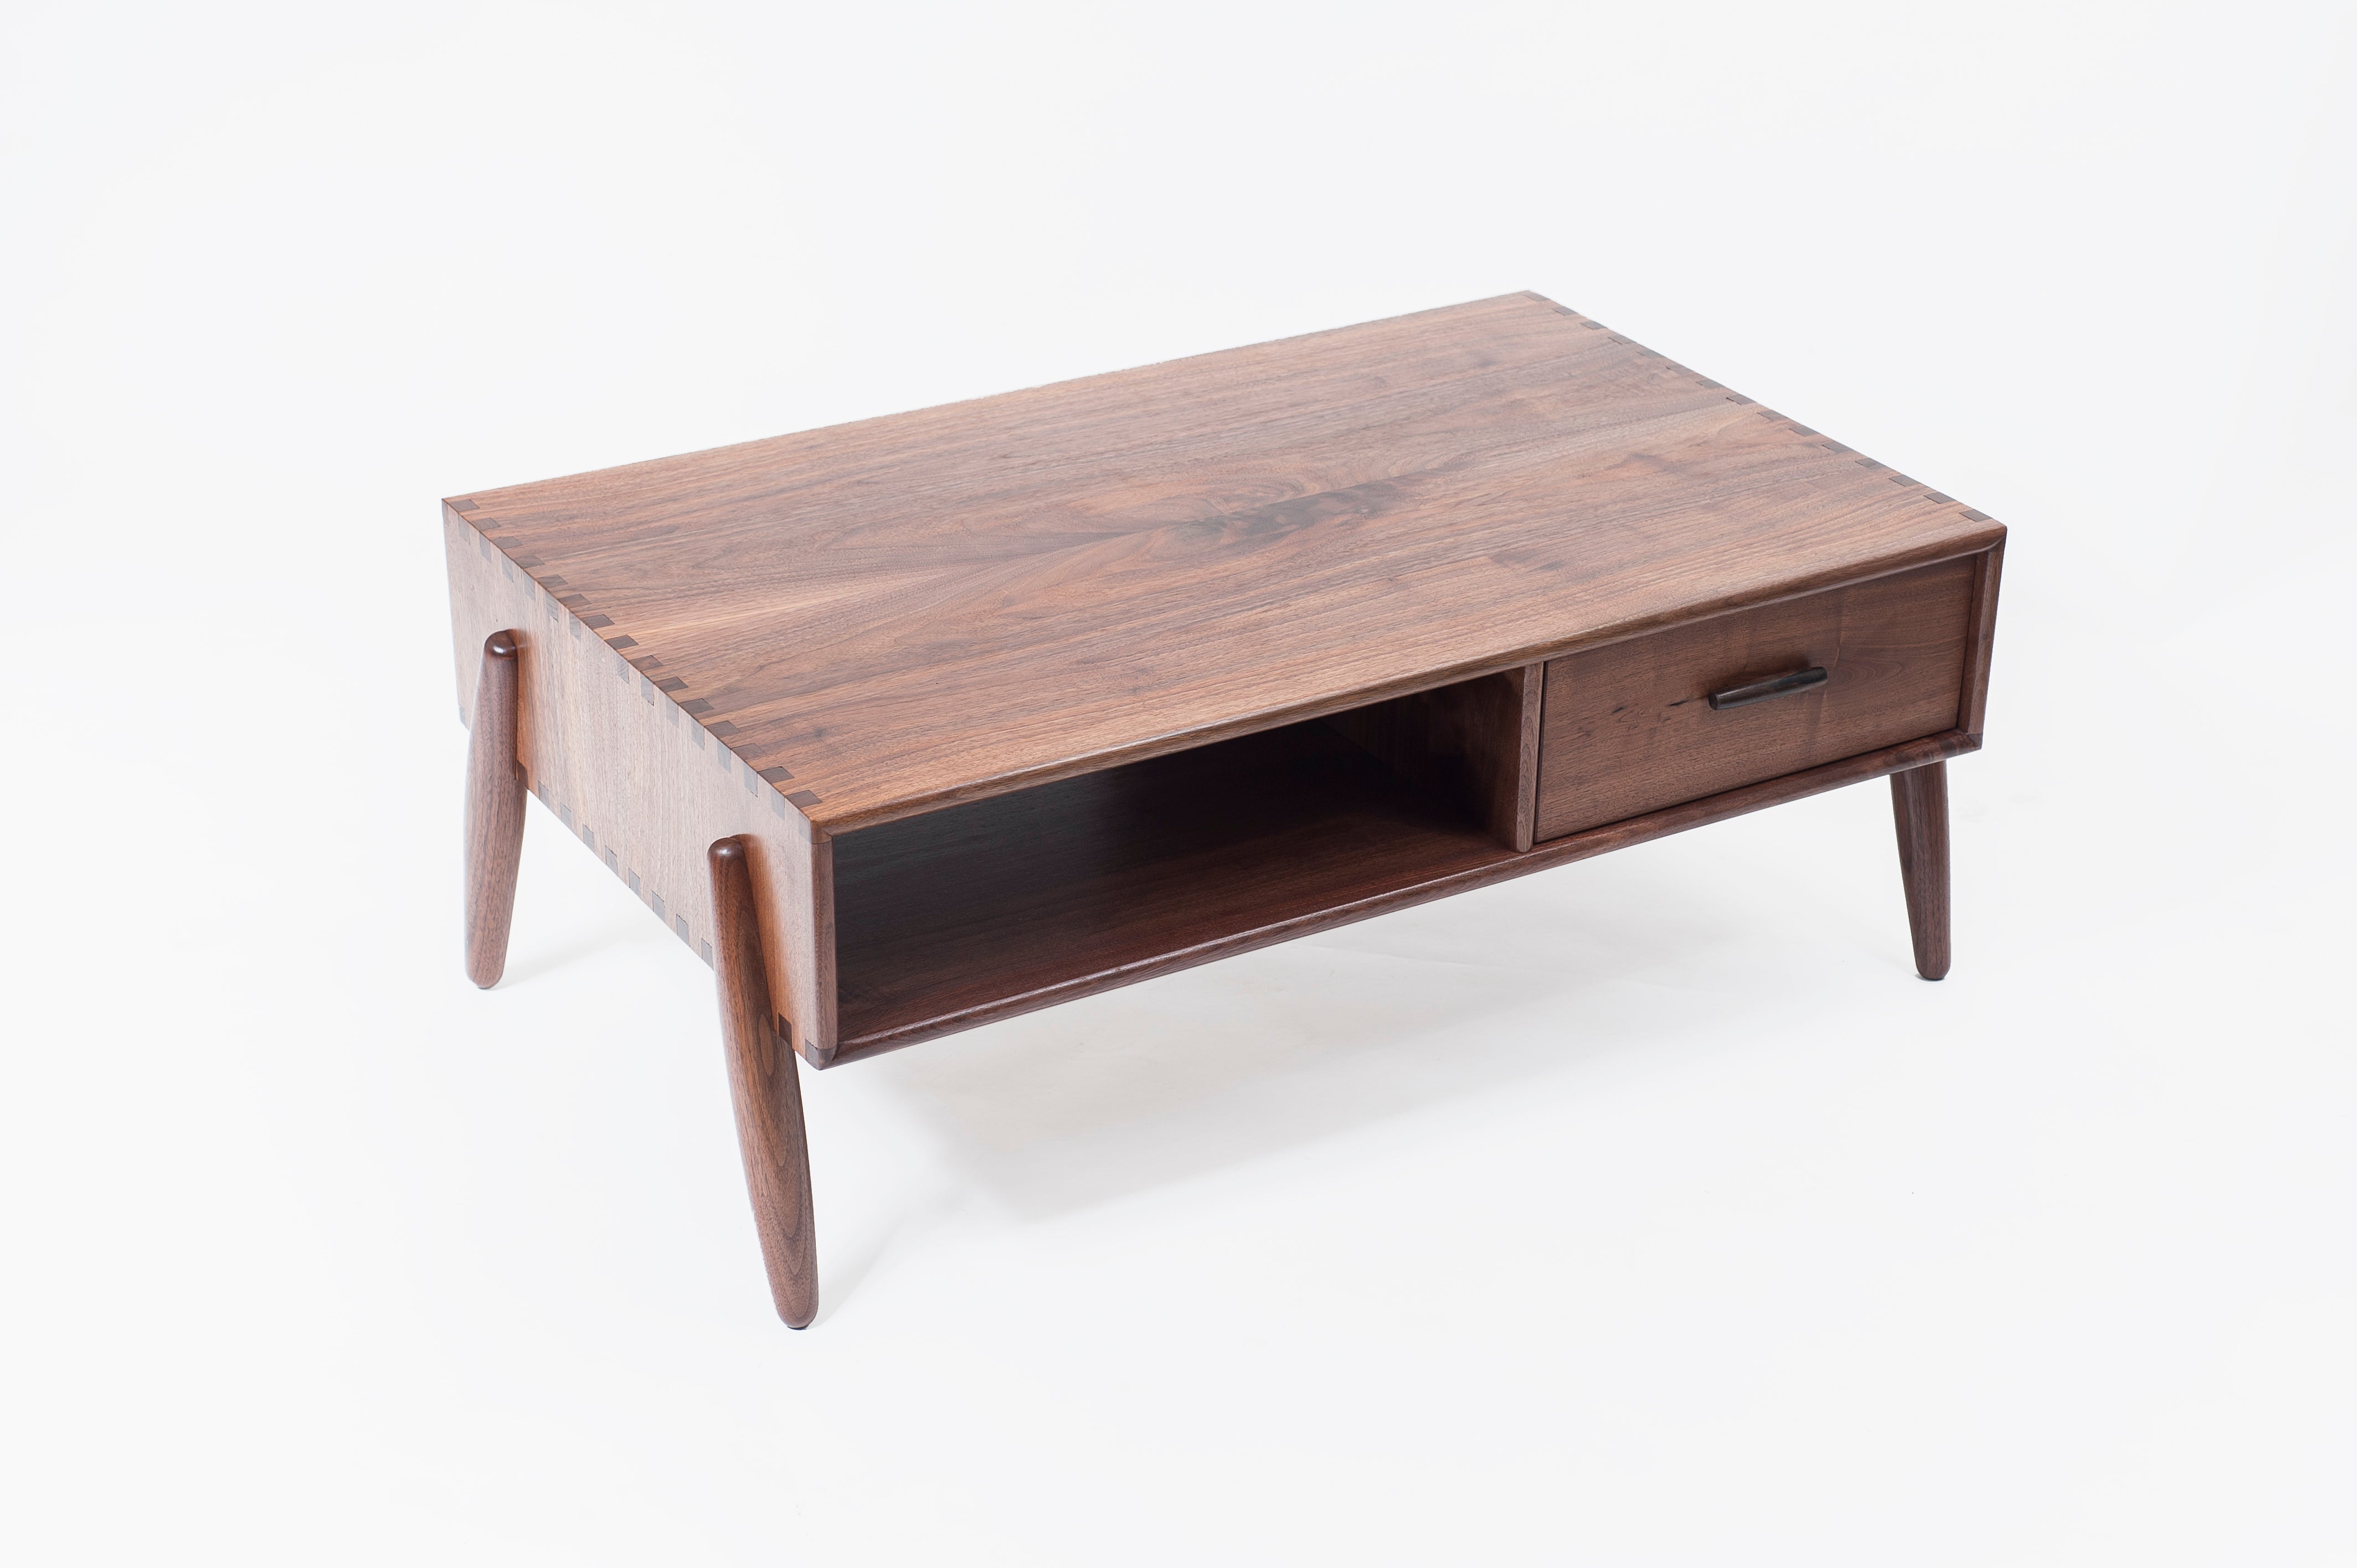 Solomon midcentury modern walnut wood Coffee Table handcrafted by Hunt & Noyer in Michigan